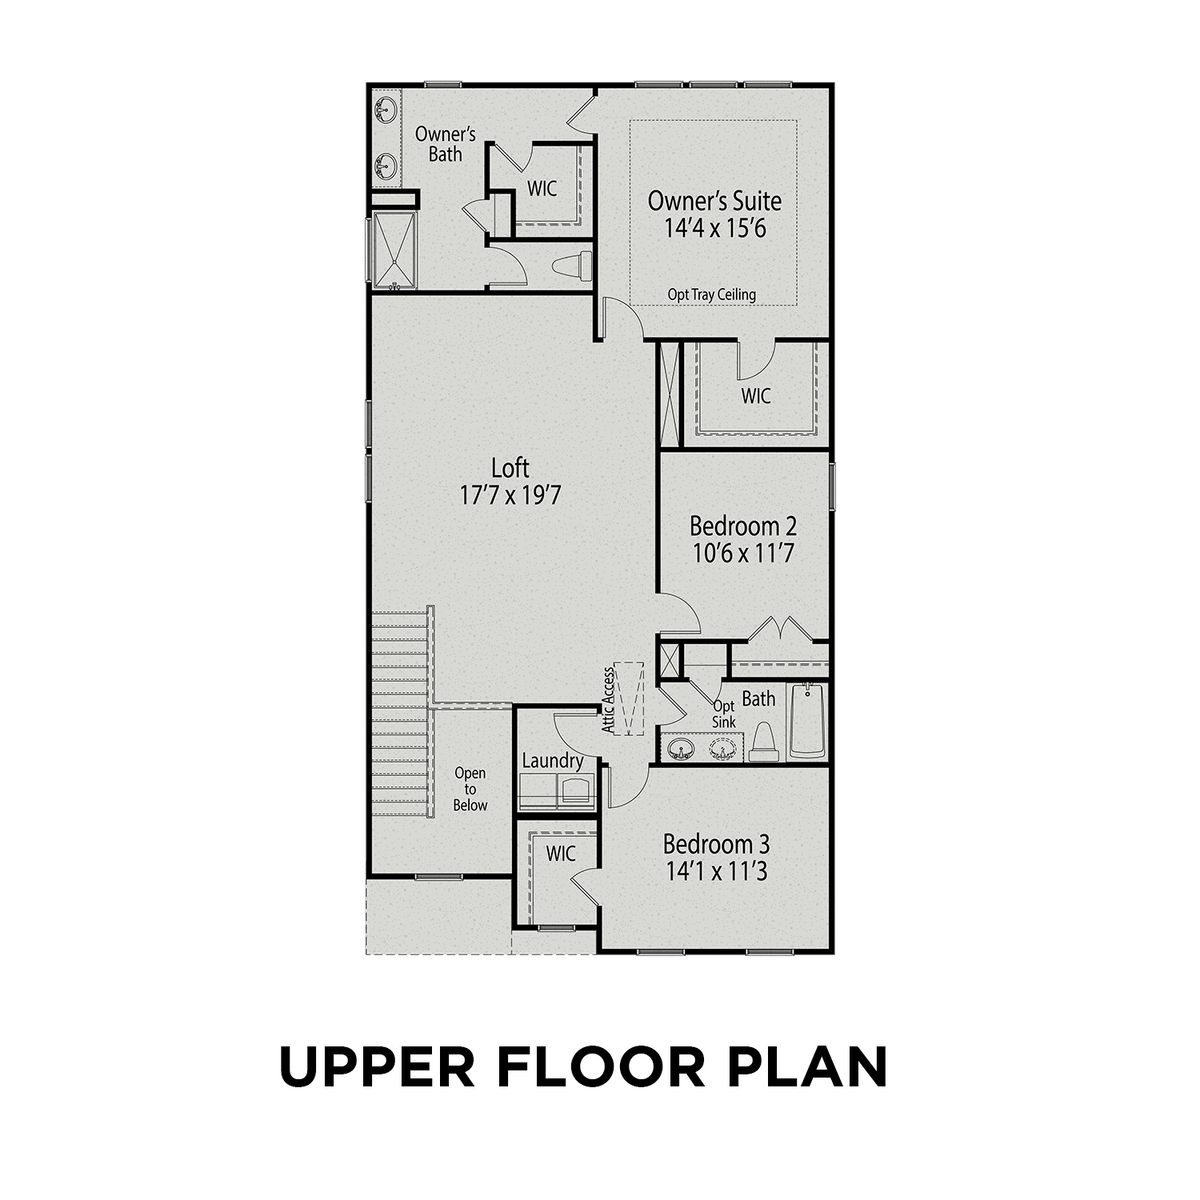 2 - The Adalynn A buildable floor plan layout in Davidson Homes' Highland Forest community.